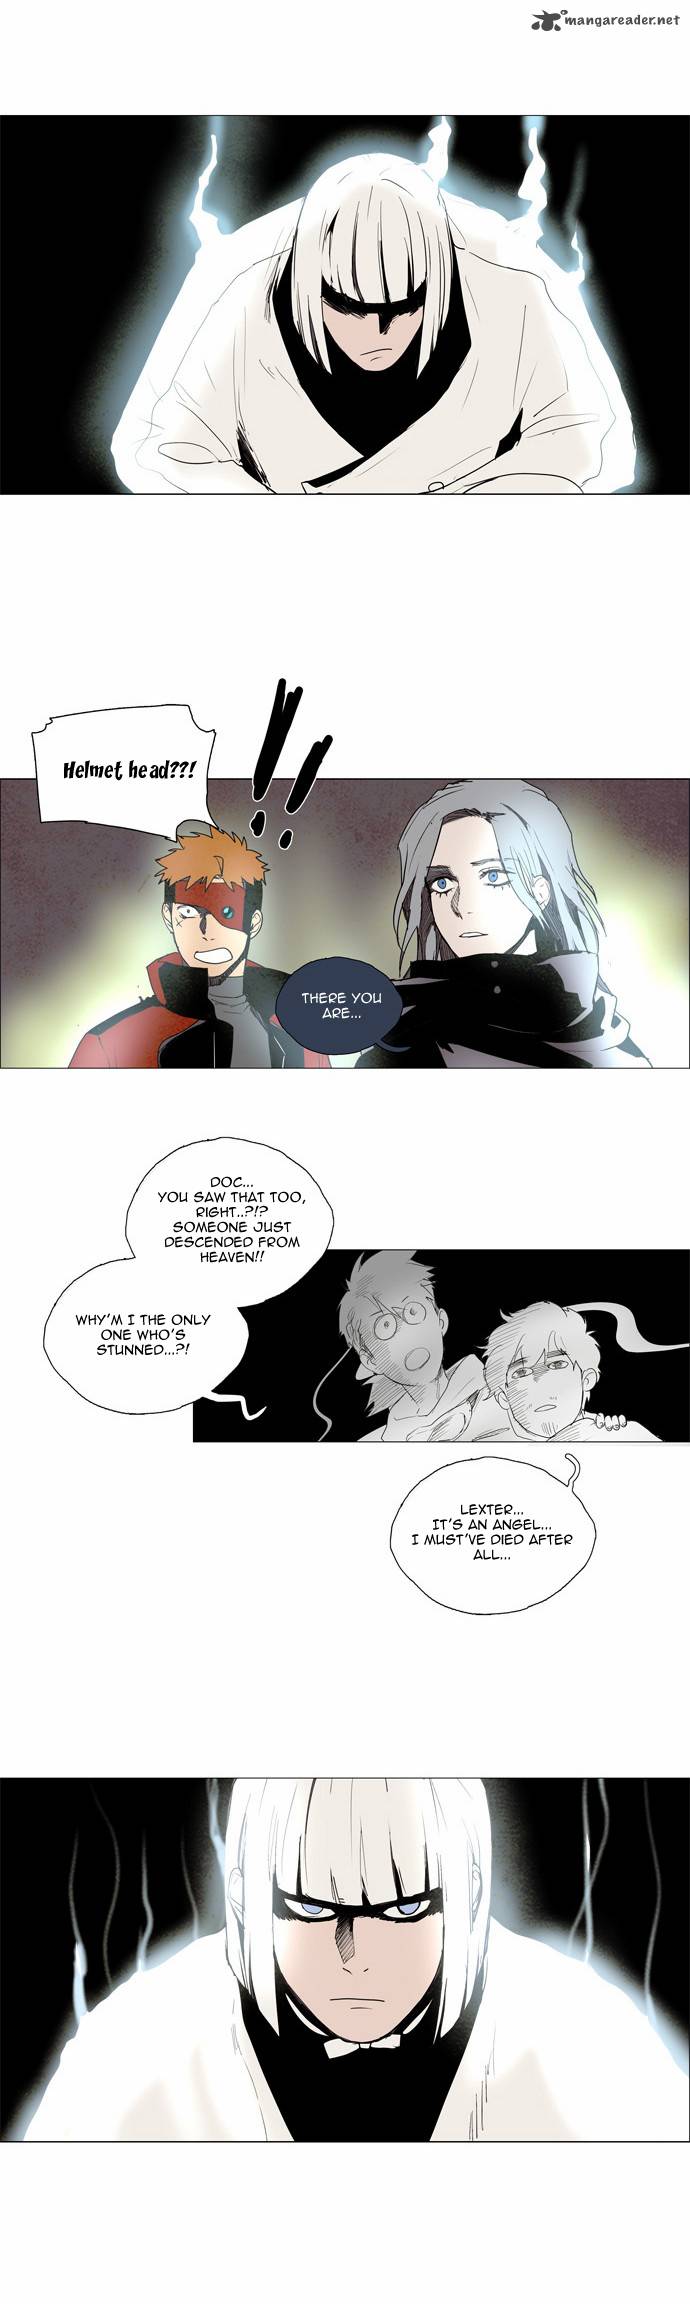 Lessa The Crimson Knight Chapter 30 Page 15